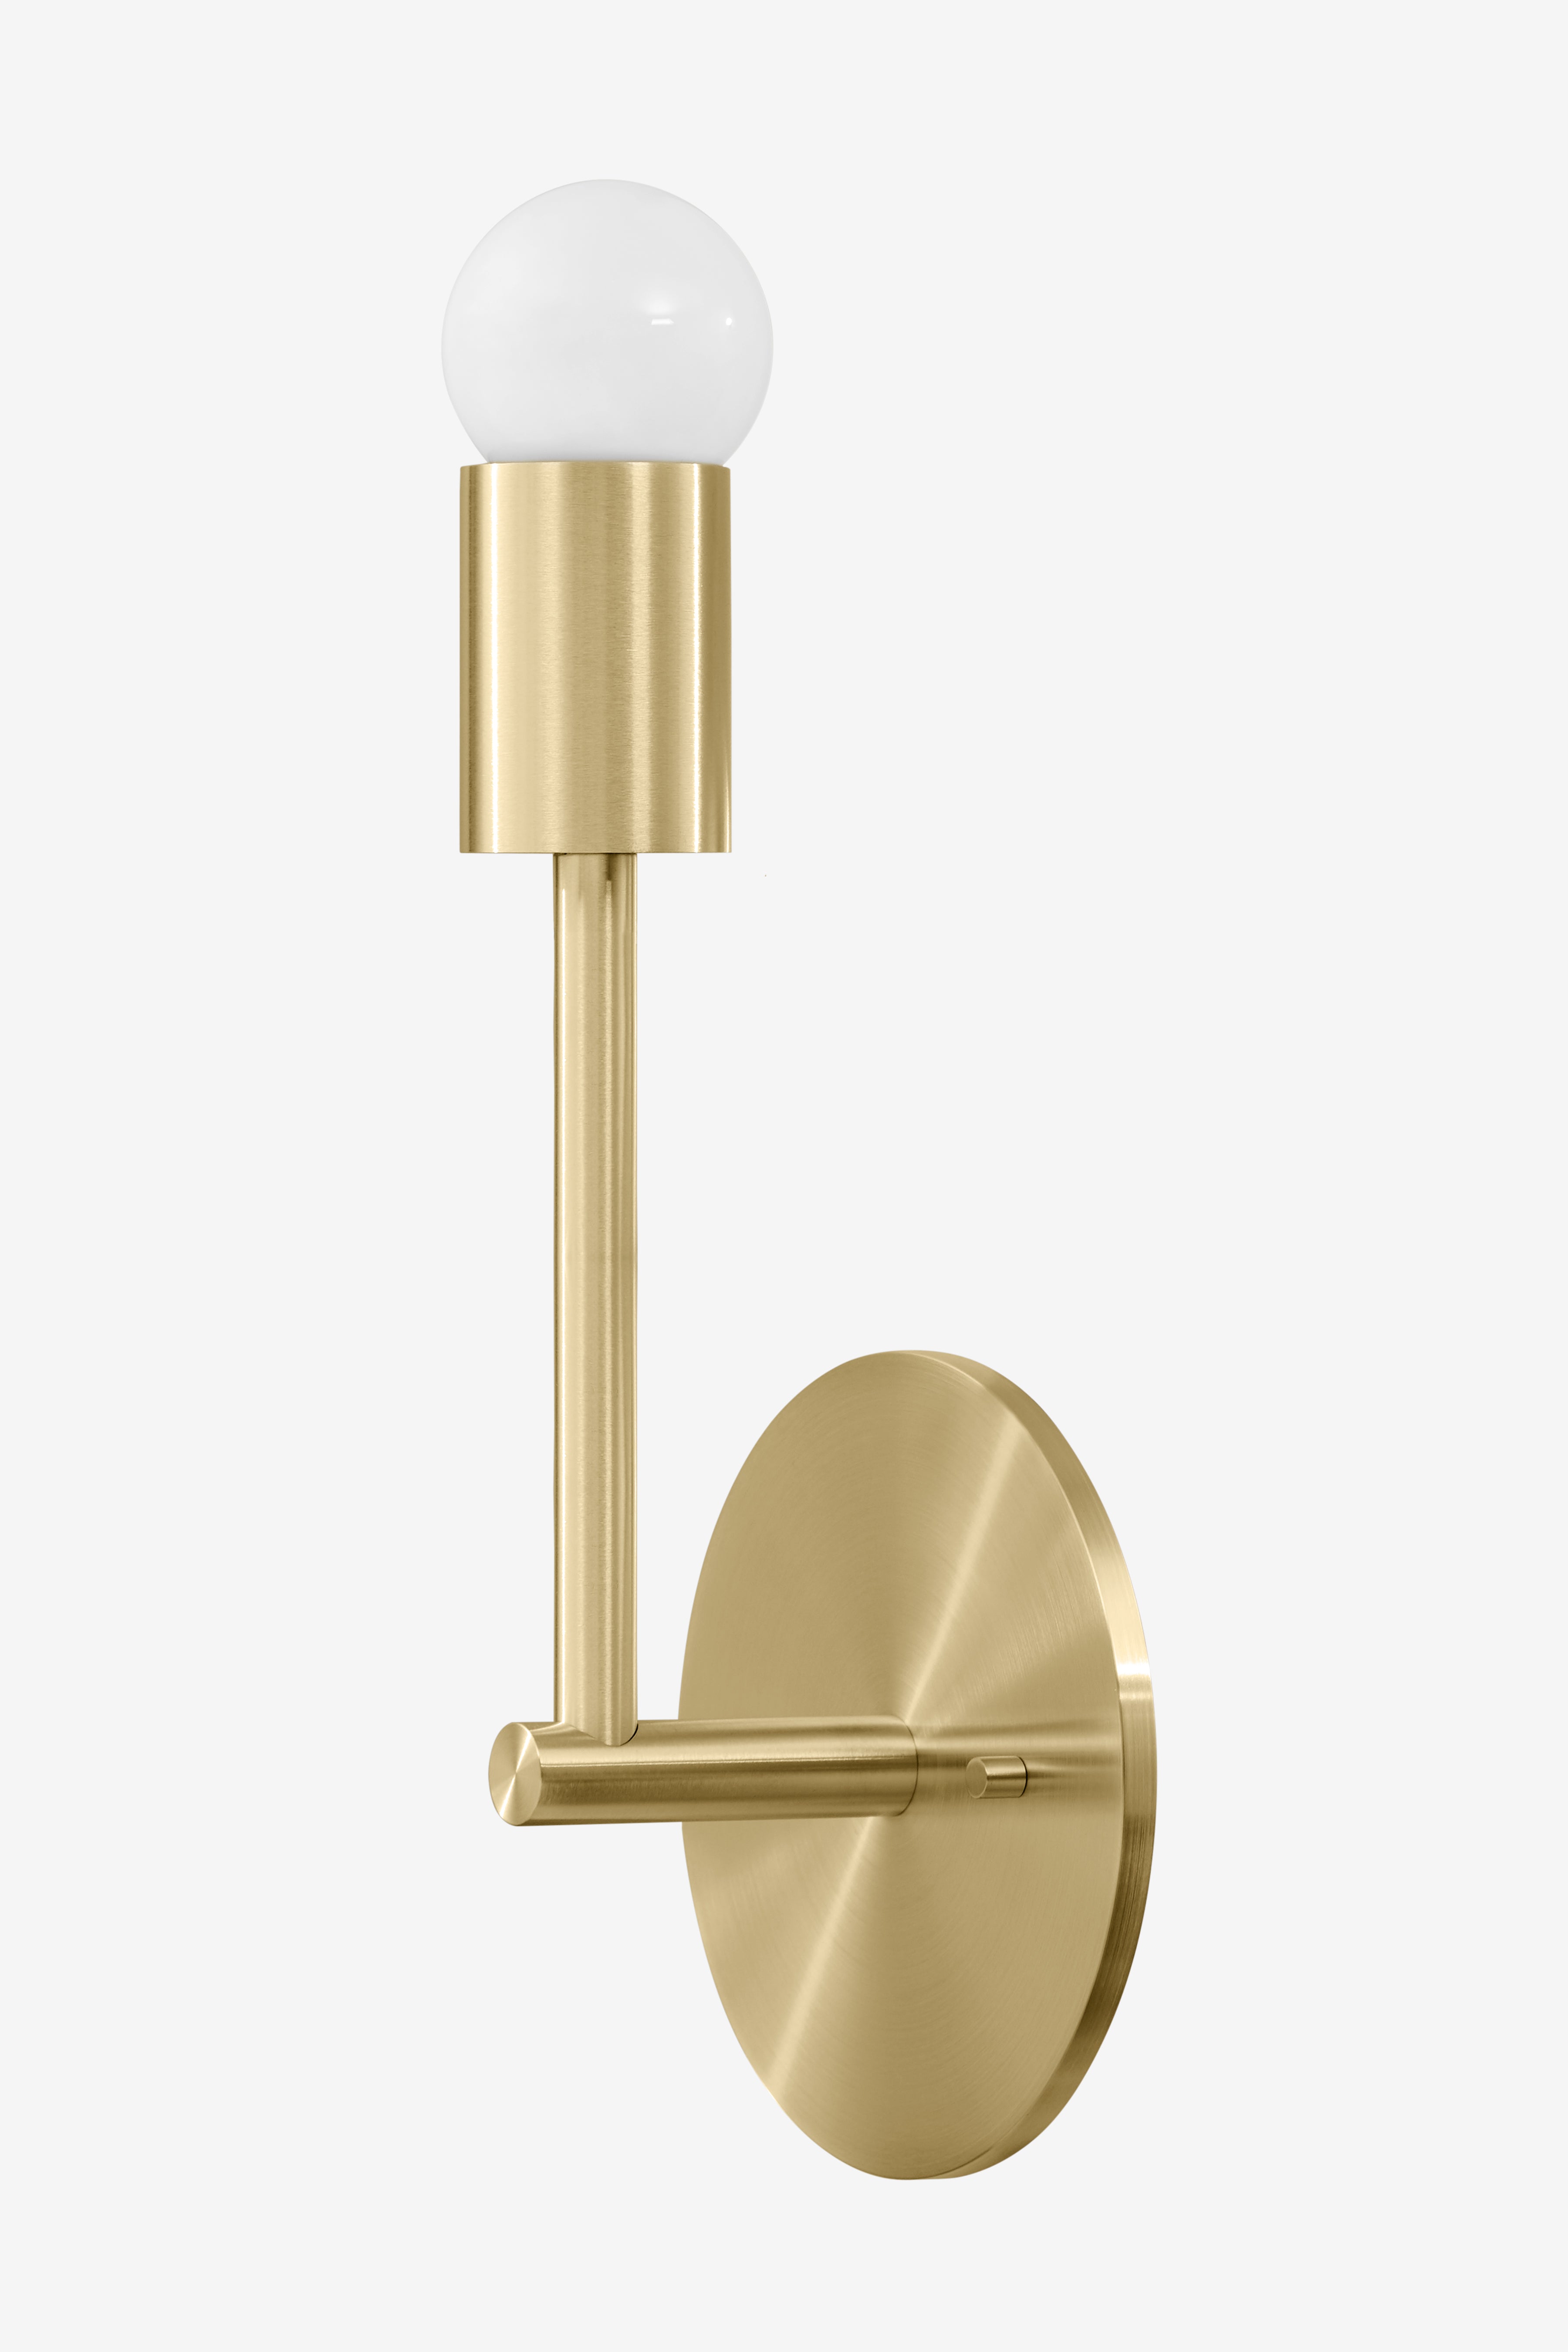 Afton Large QS / Sconce / Brass